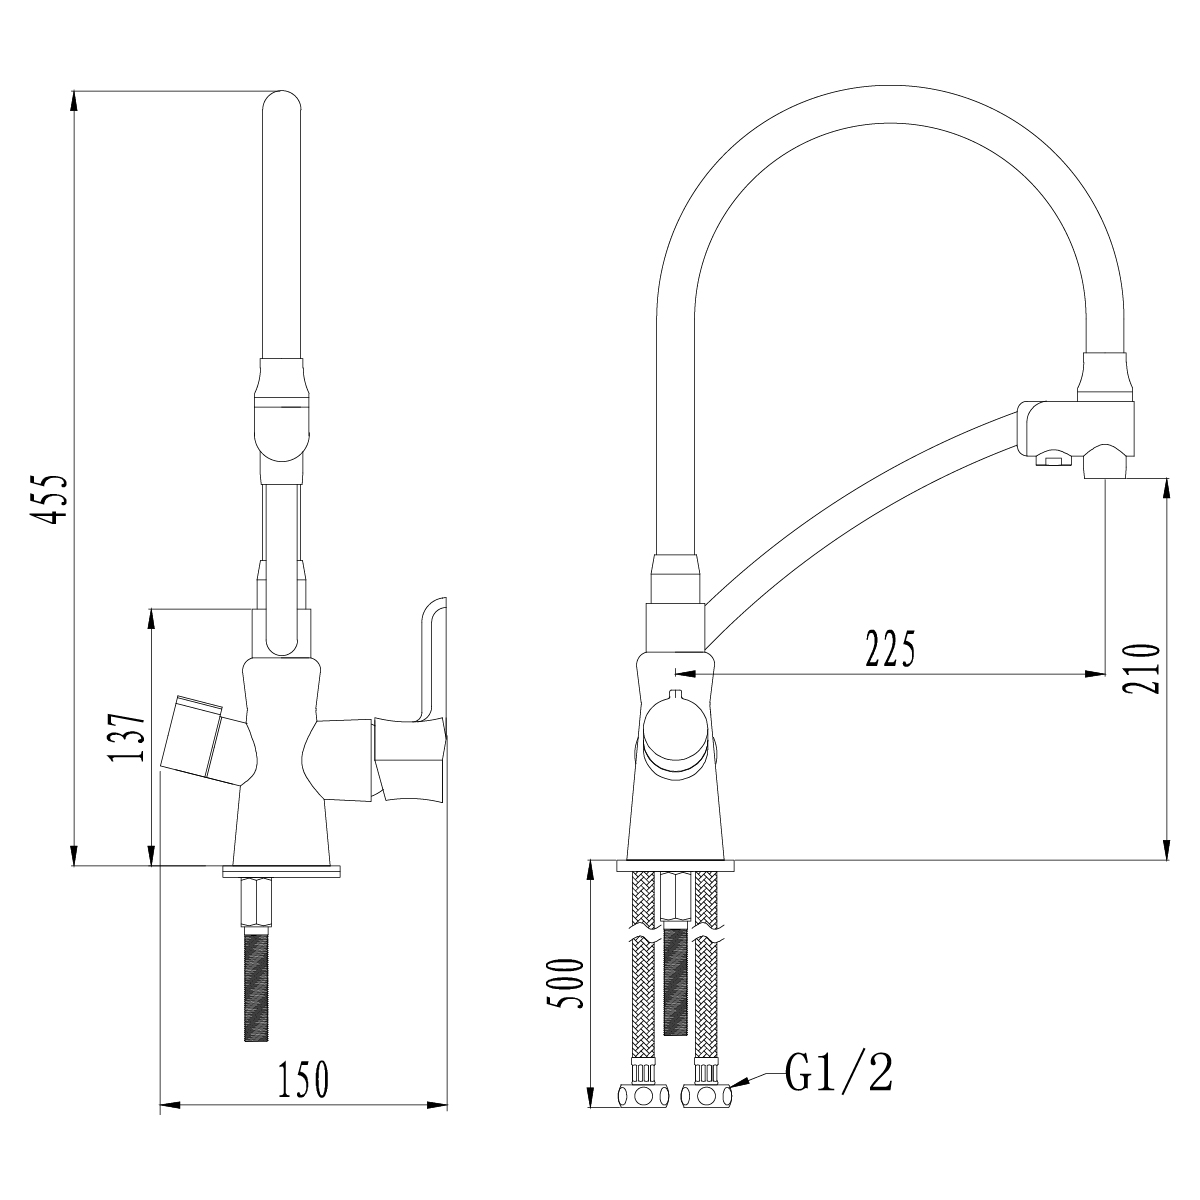 LM3070C-Green Kitchen faucet 
with connection to drinking 
water supply